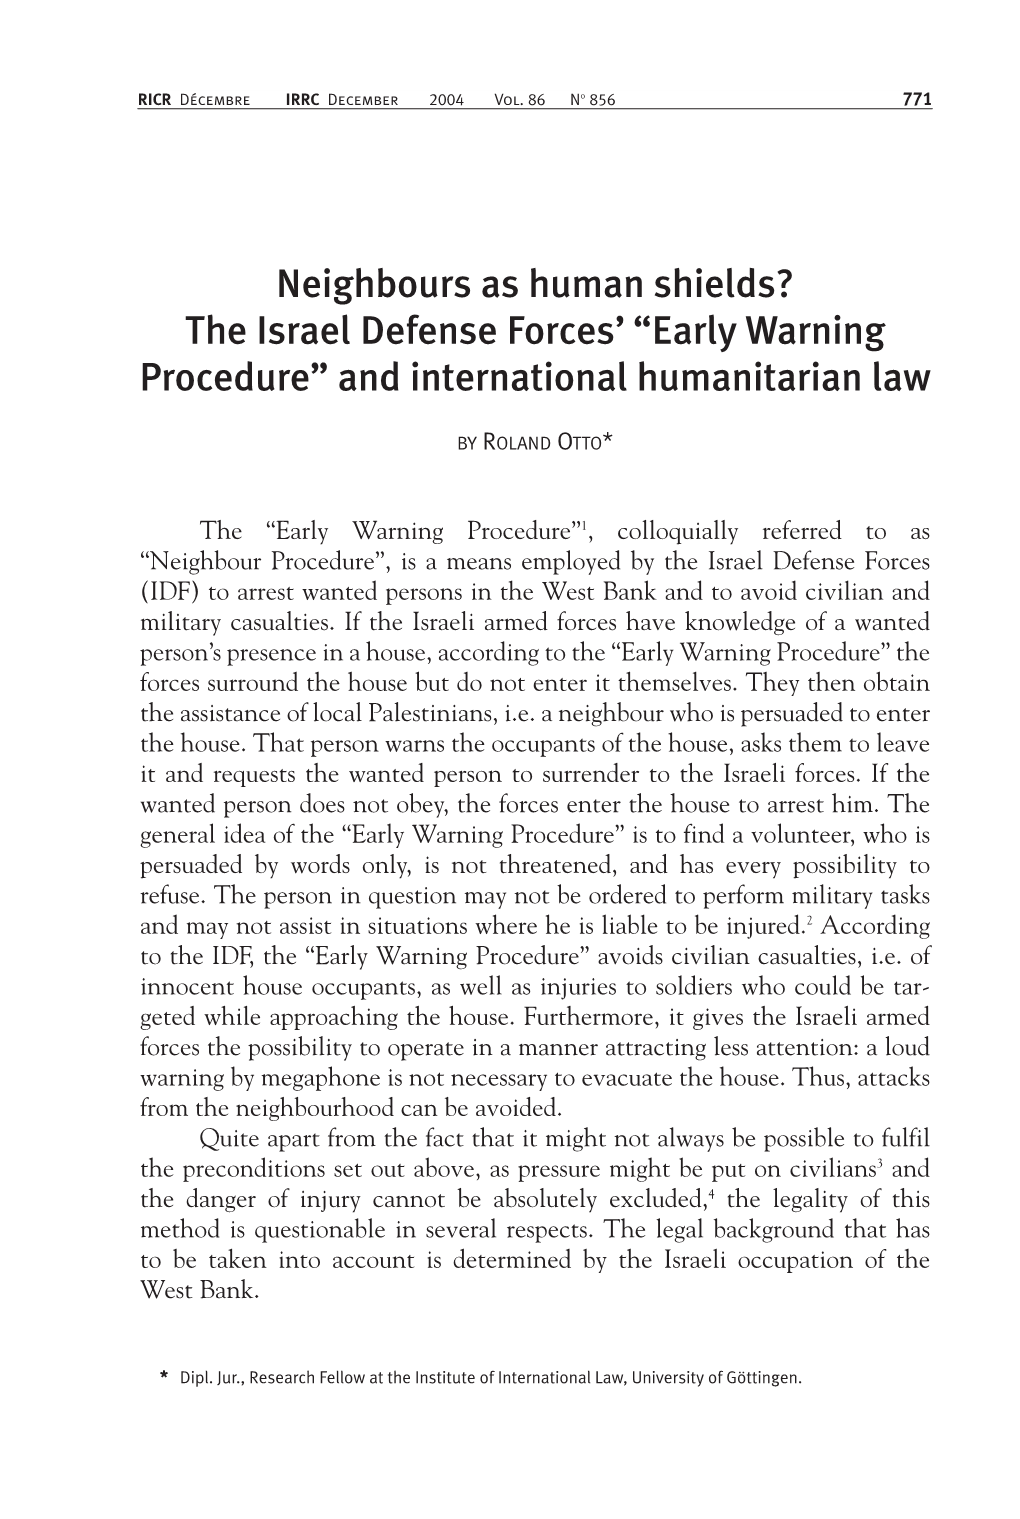 Neighbours As Human Shields? the Israel Defense Forces’ “Early Warning Procedure” and International Humanitarian Law